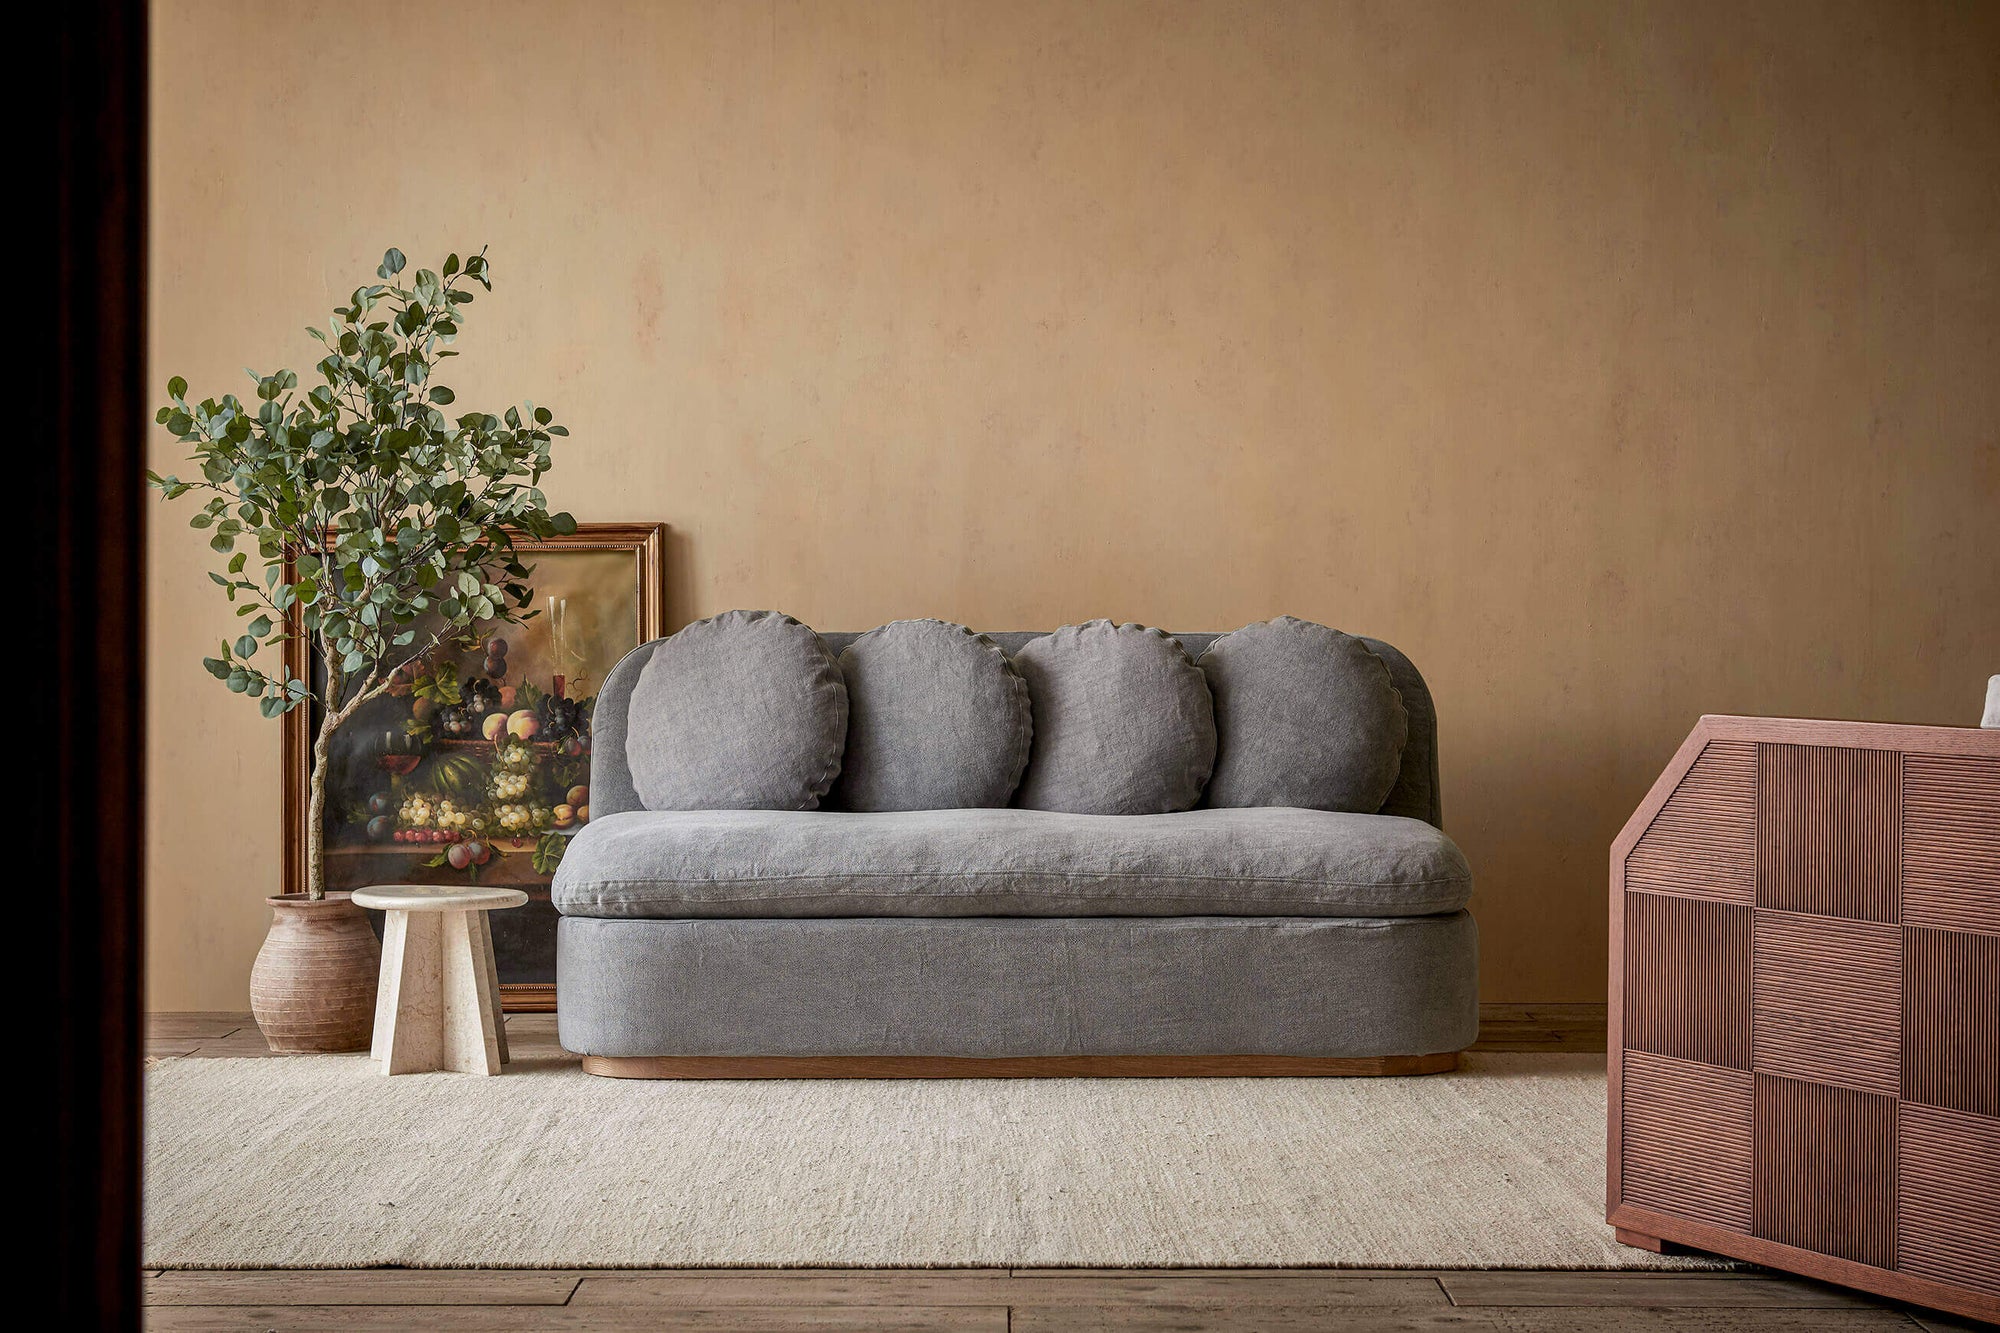 Olea 72" Sofa in Ink Cap, a medium cool grey Light Weight Linen, next to a side table, a framed painting, and a large potted plant